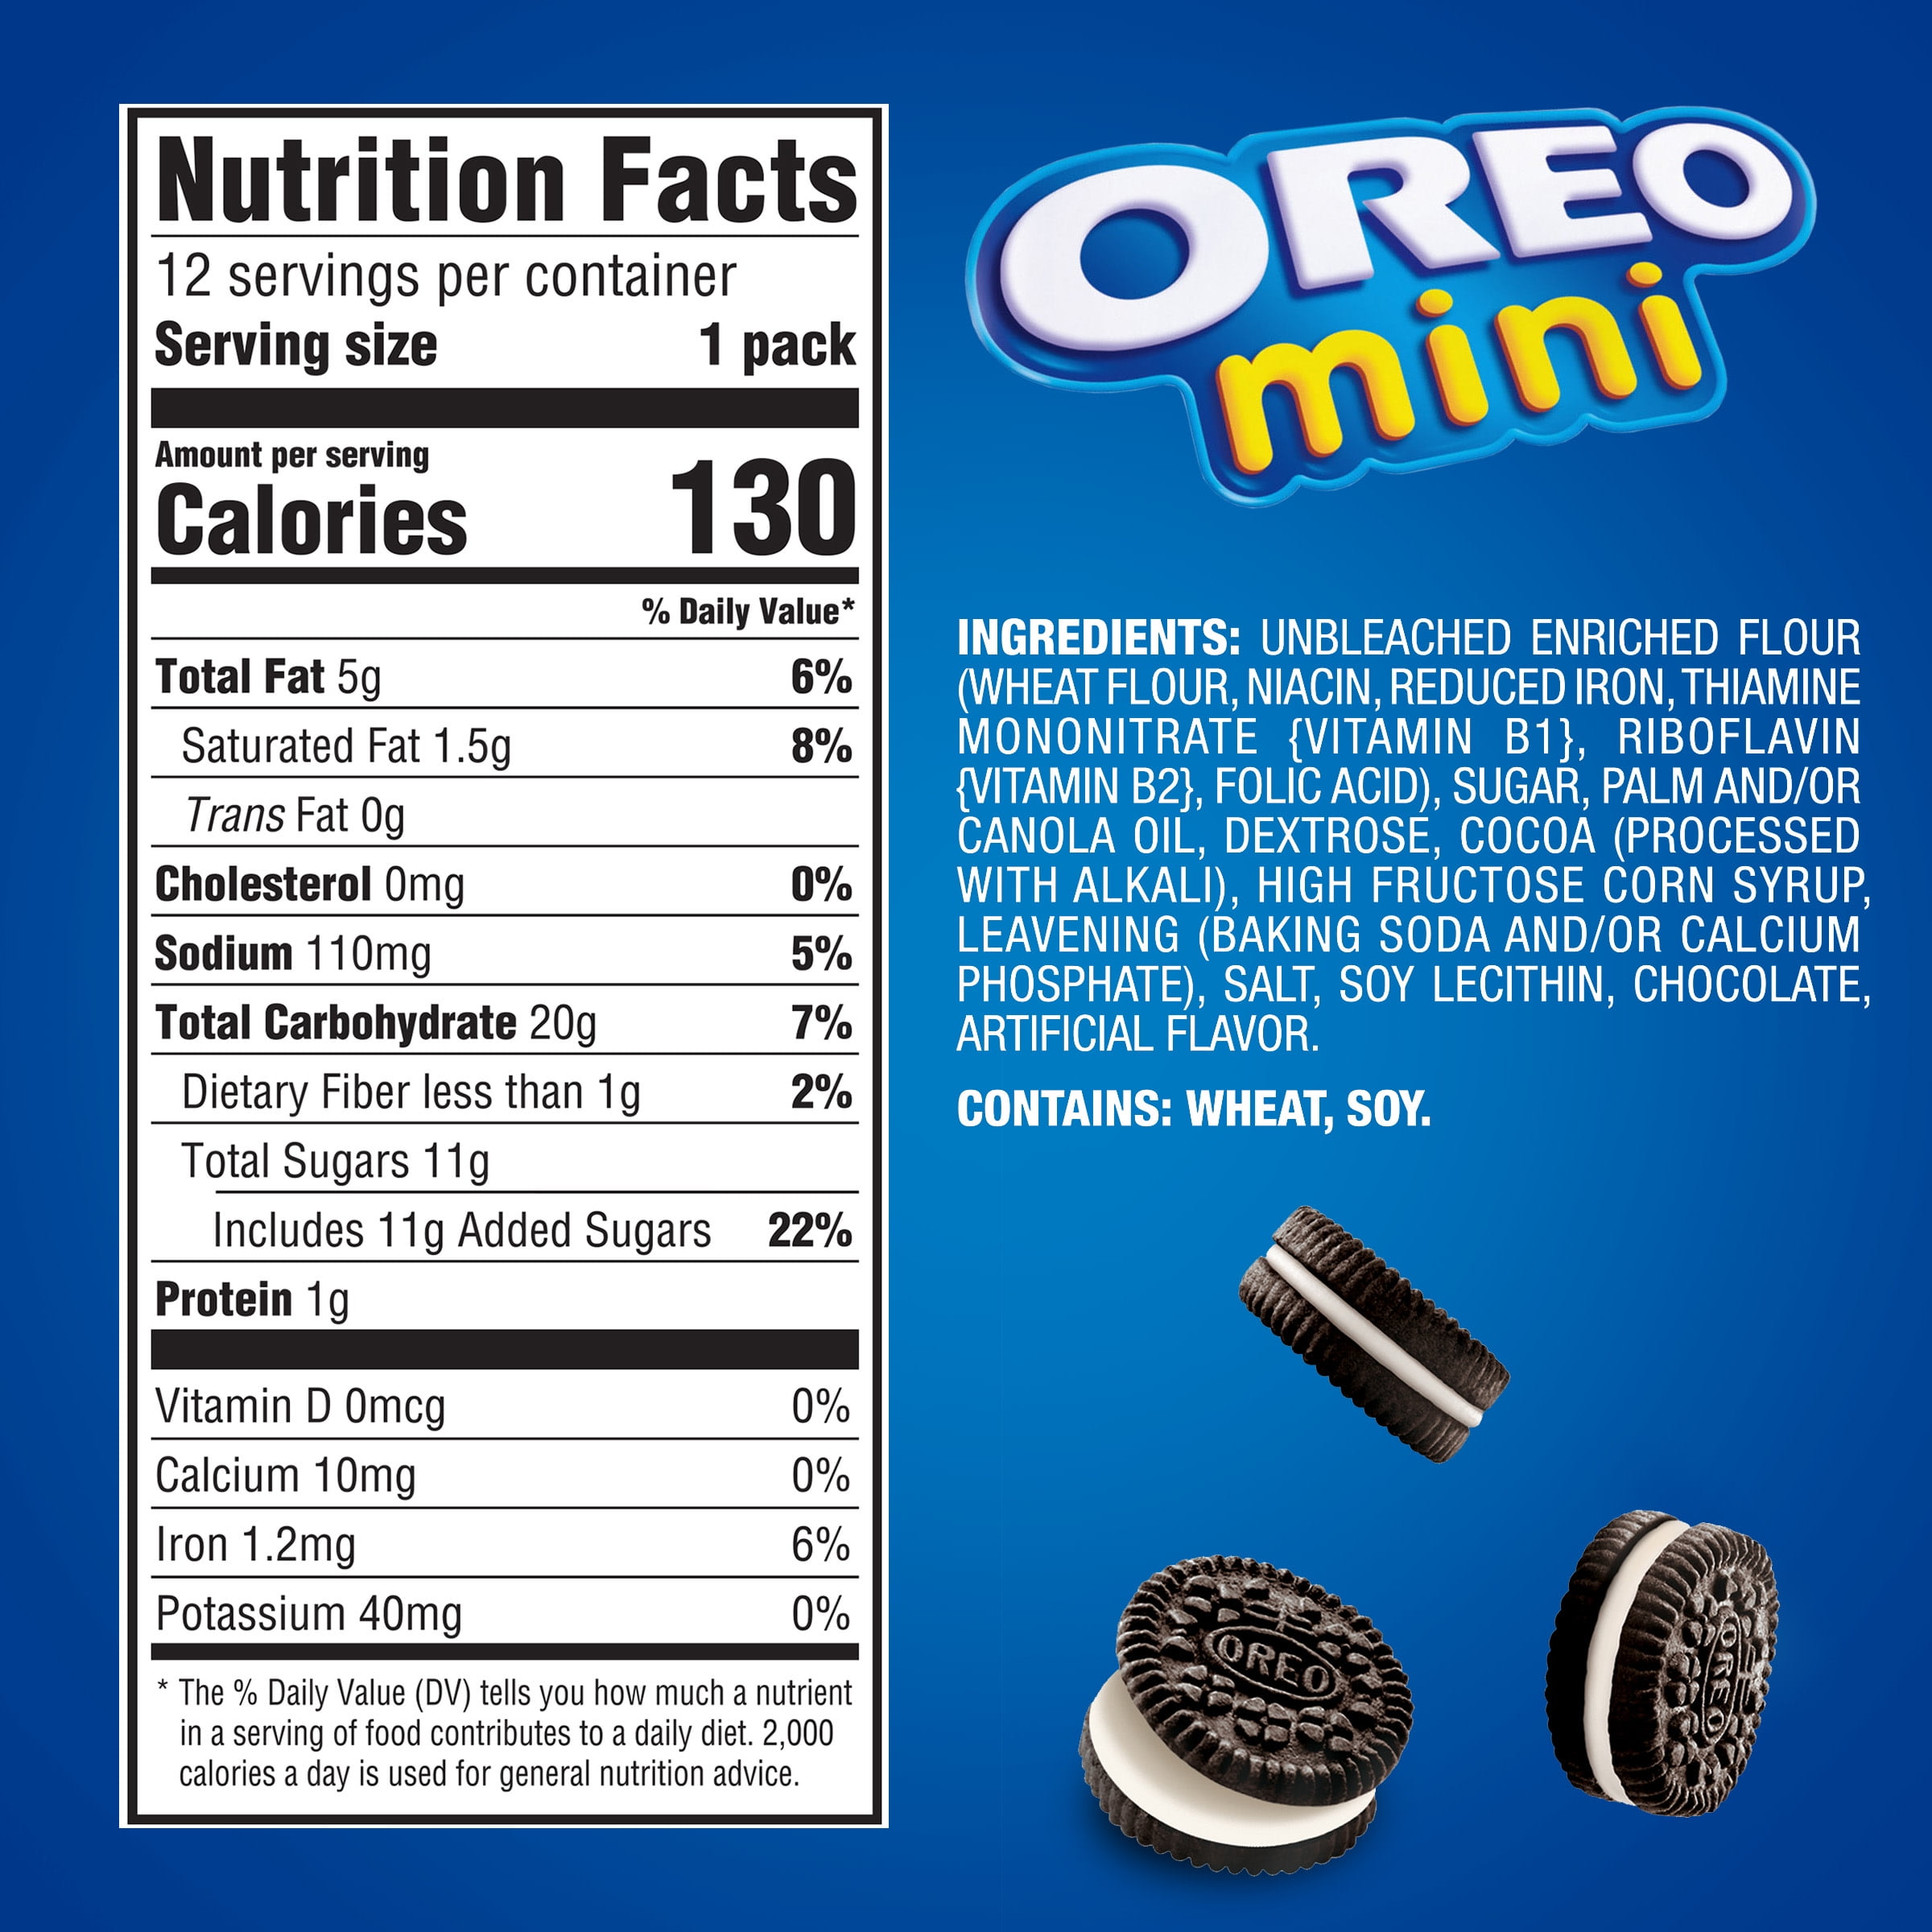 Oreo Nutrition Facts Label Labels Design Ideas | My XXX Hot Girl